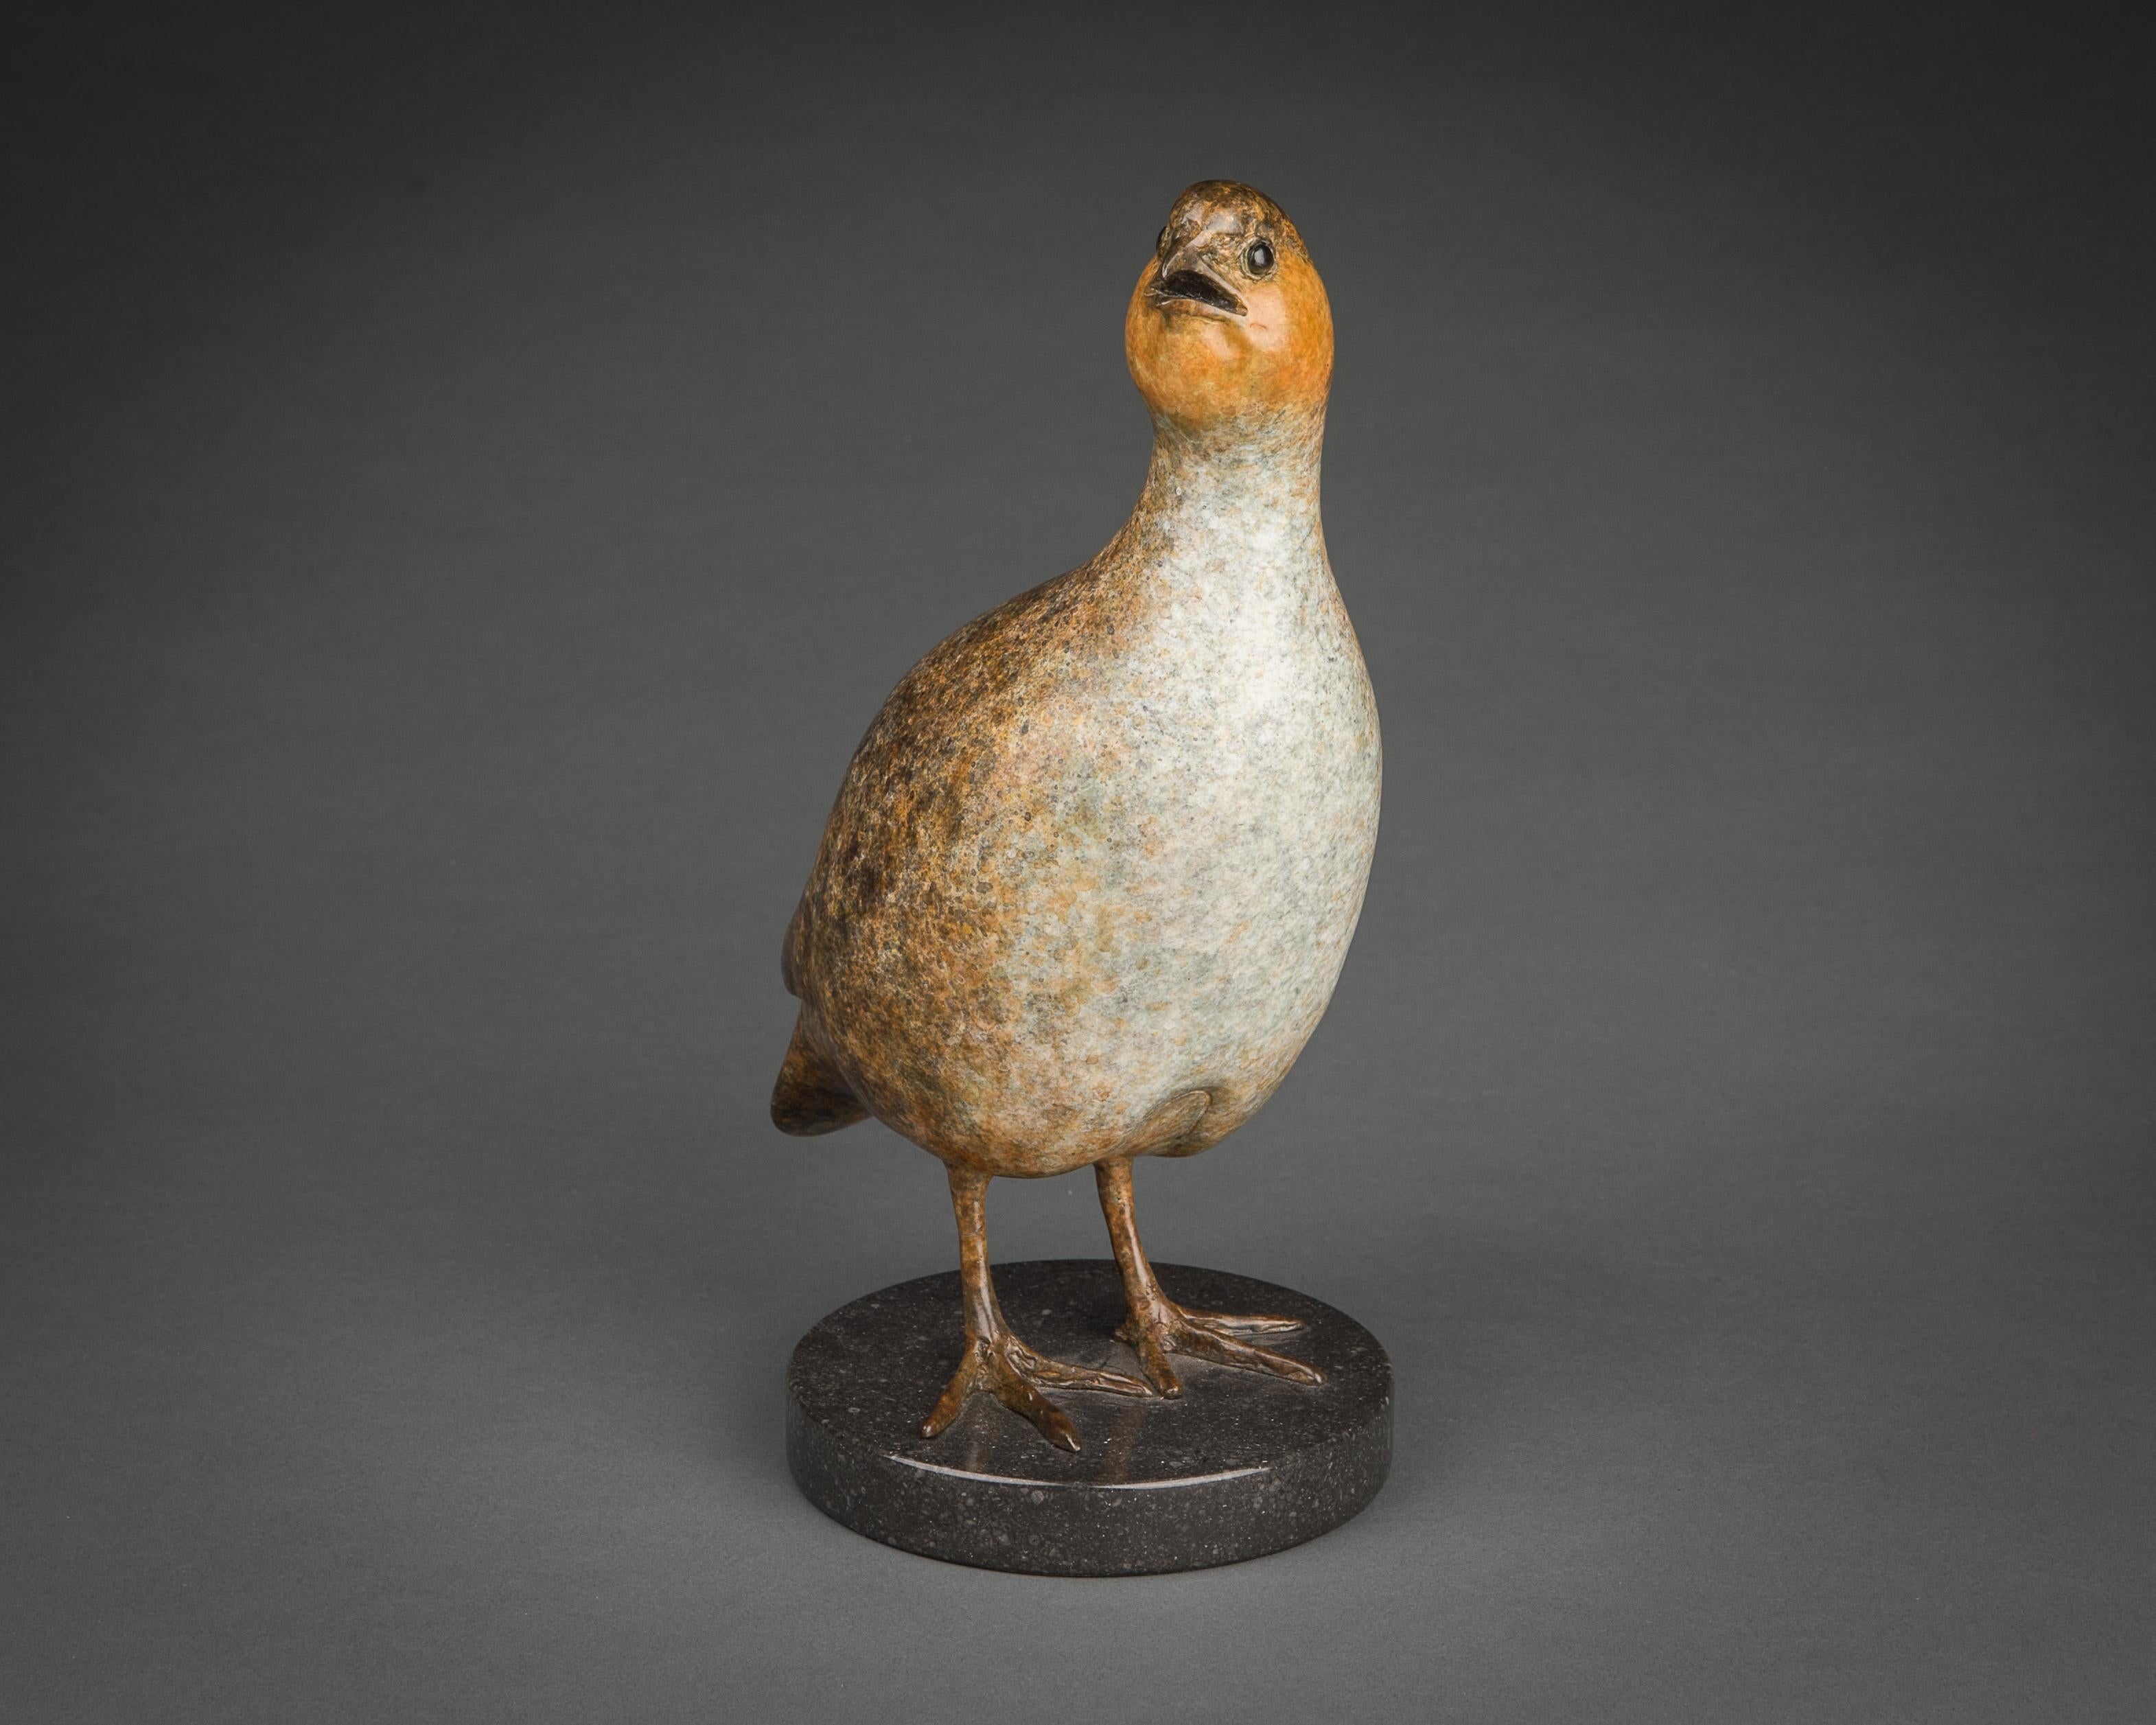 'Standing Partridge' is full of character! Richard Smith is a part-time sculptor and a part-time gamekeeper, who surrounds himself with wildlife on a daily basis. His love and knowledge of the animals he sculpts is evident. This solid bronze